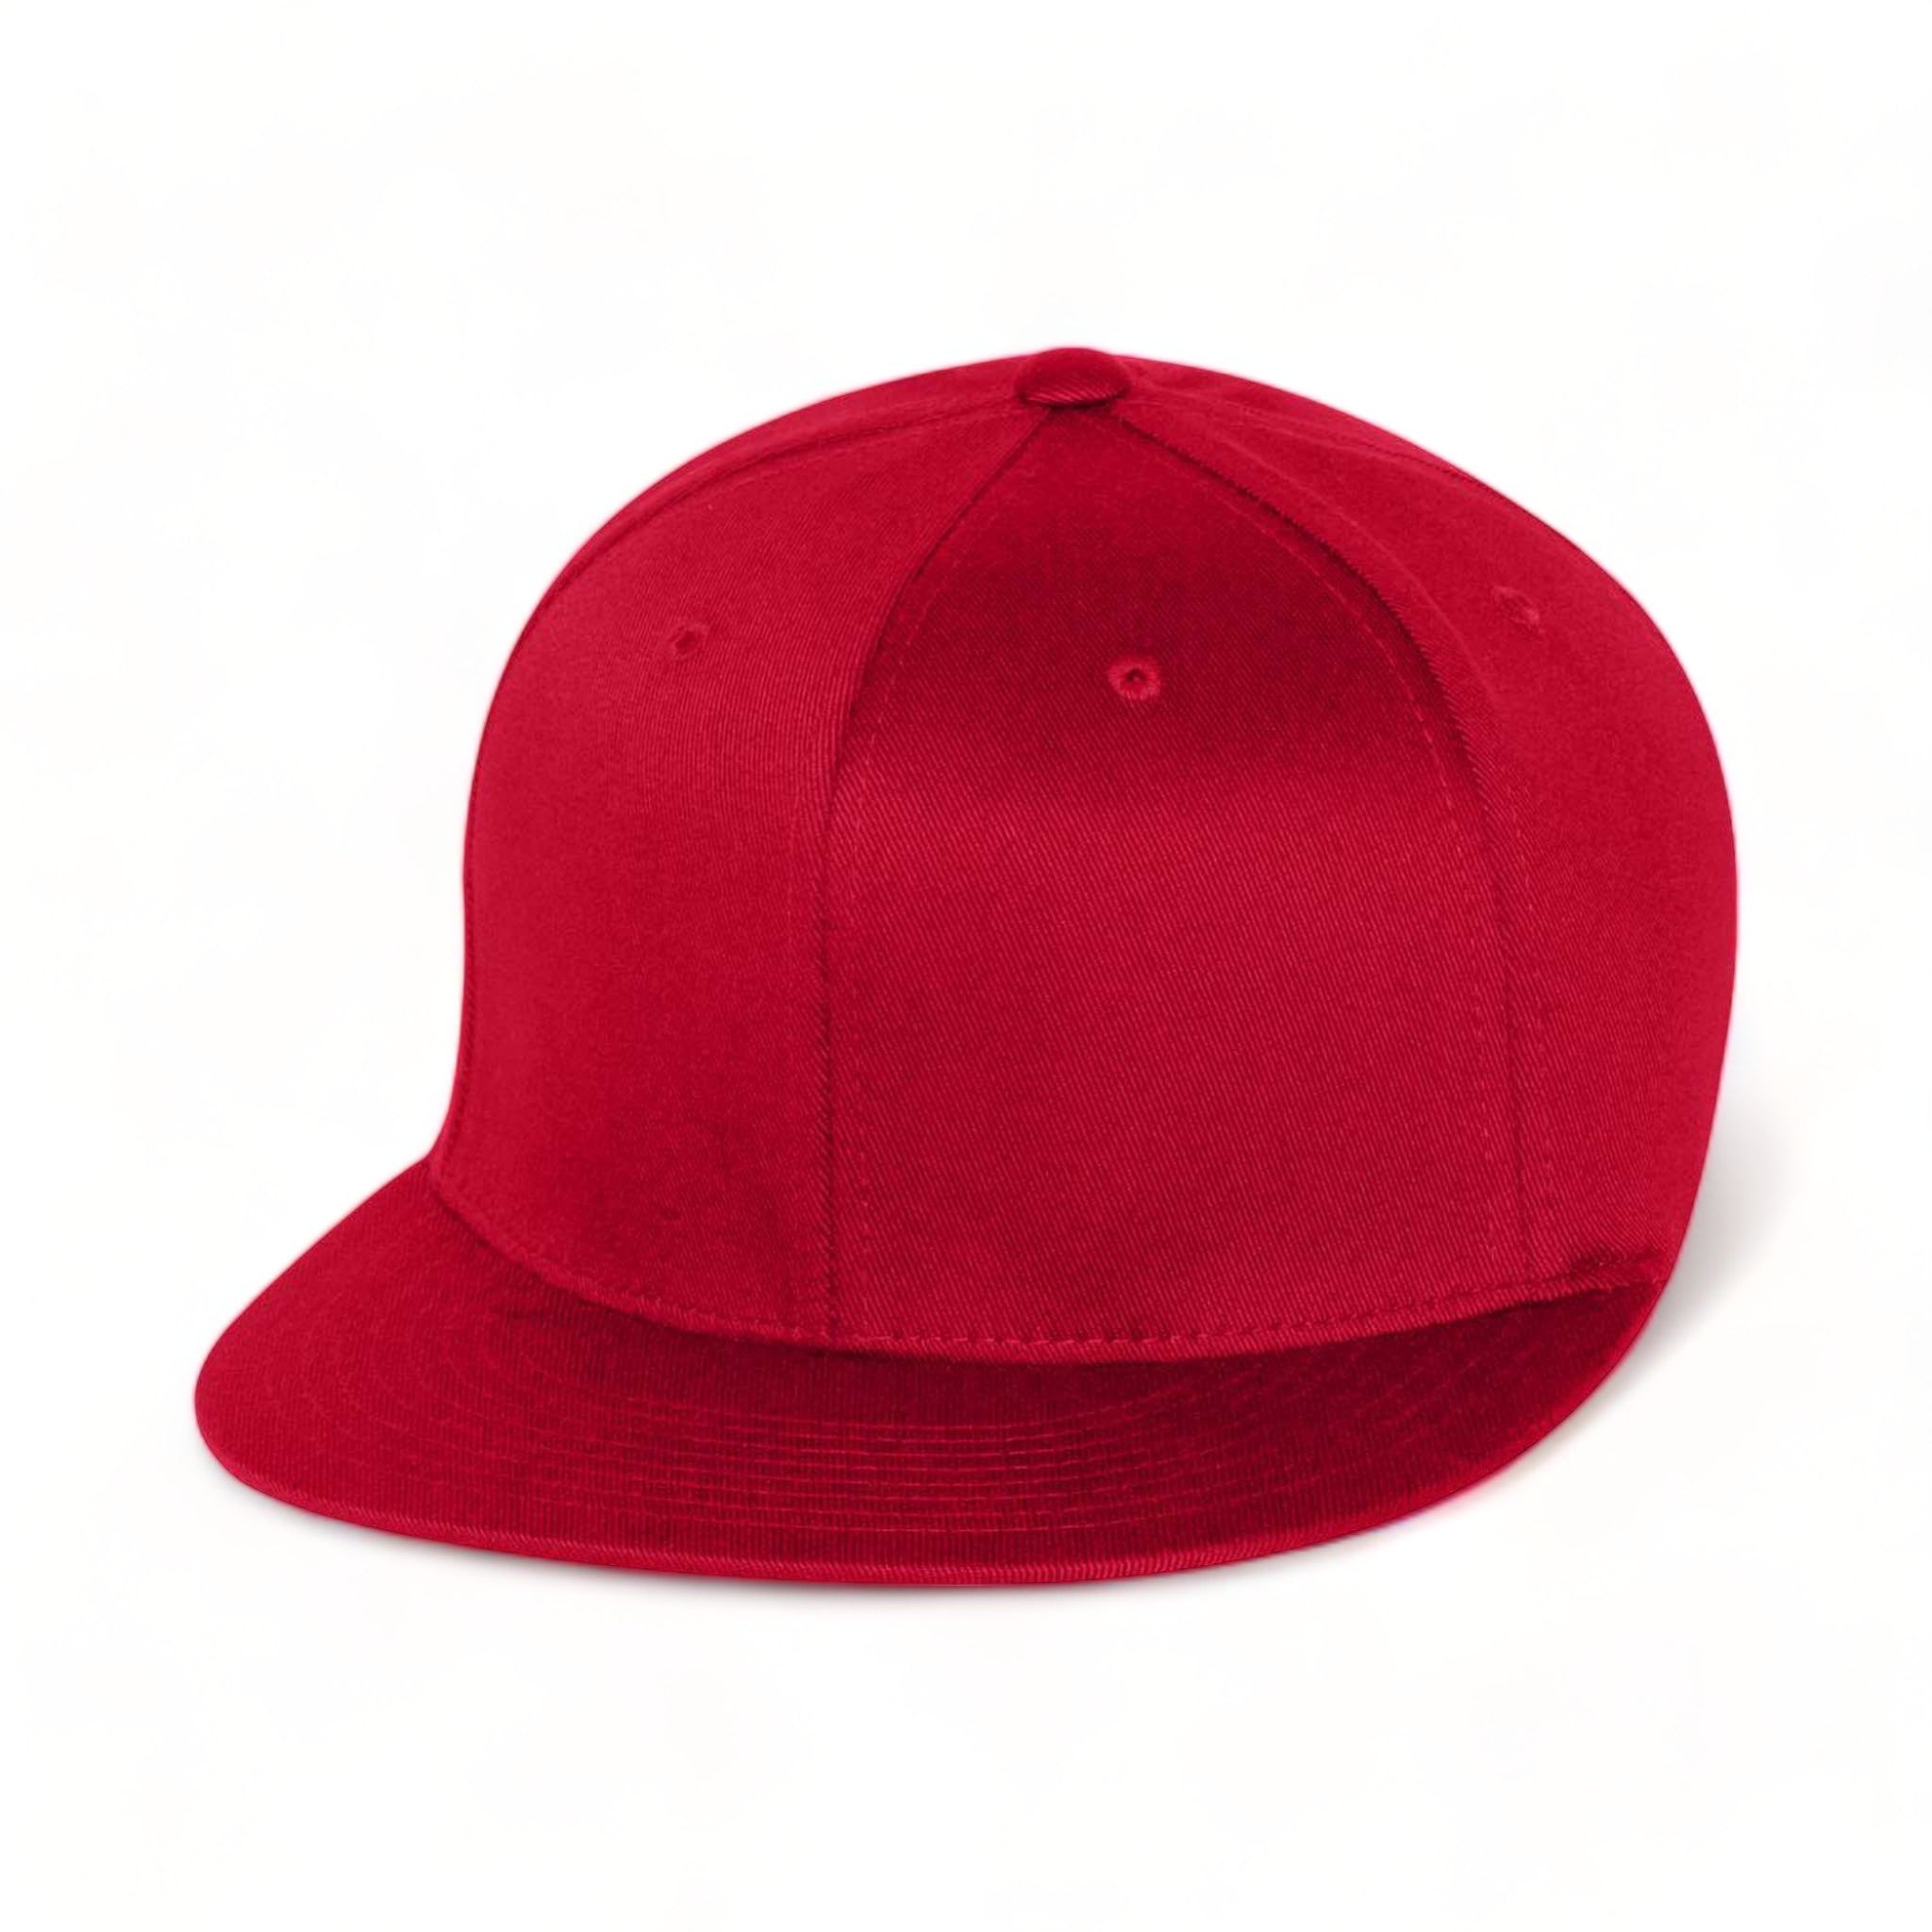 Front view of Flexfit 6297f custom hat in red